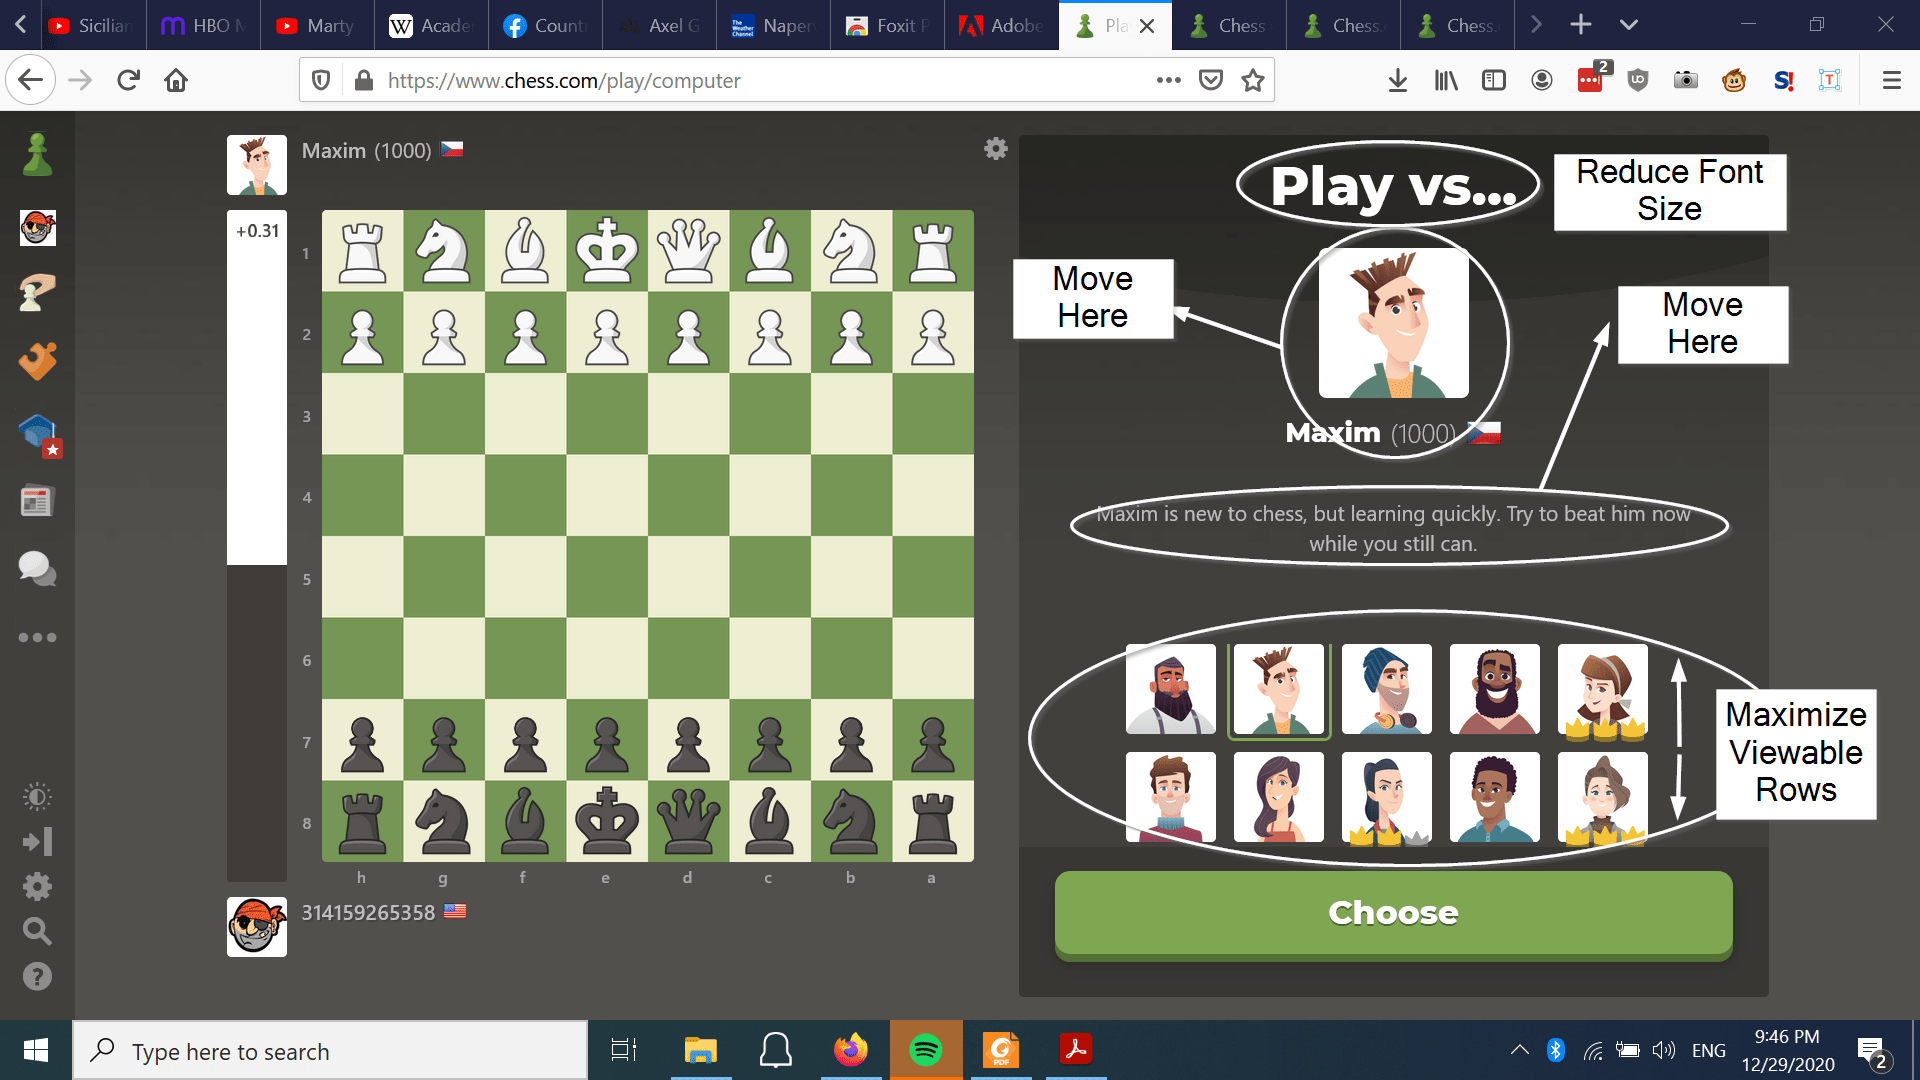 NEW: Vs Computer Overtaken by Bots! - Chess Forums - Page 5